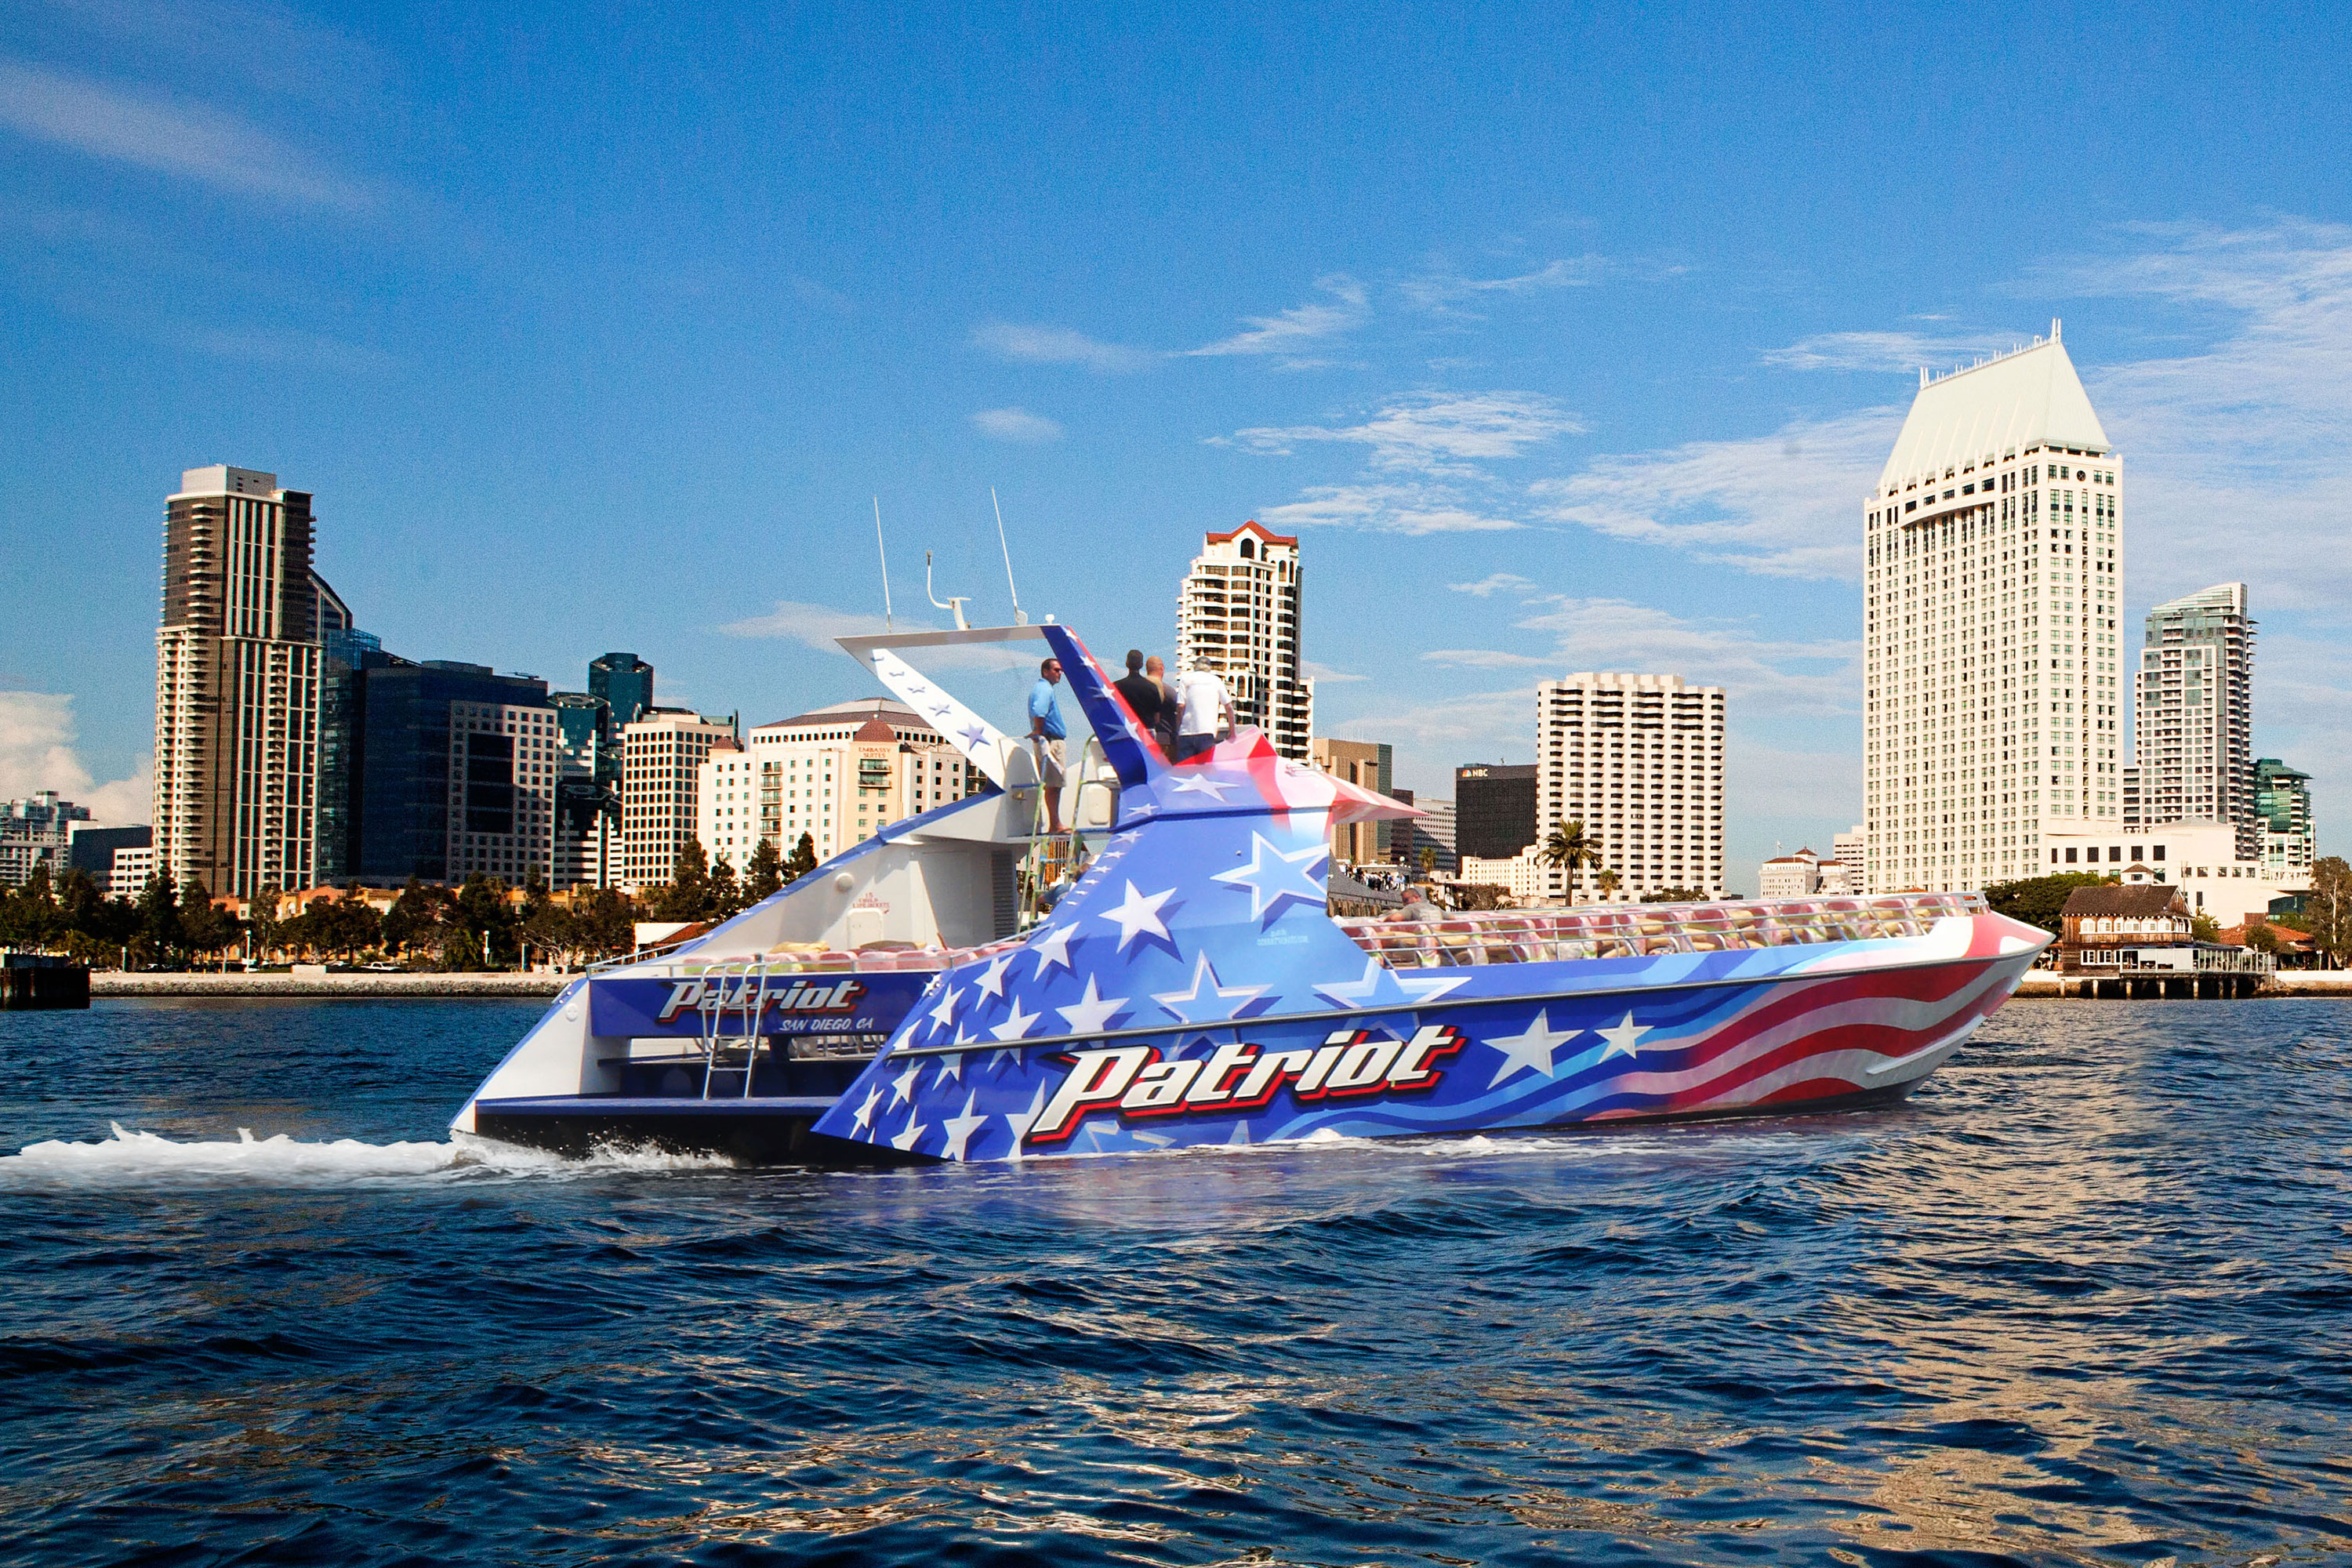 What should you look for when buying a used jet boat?